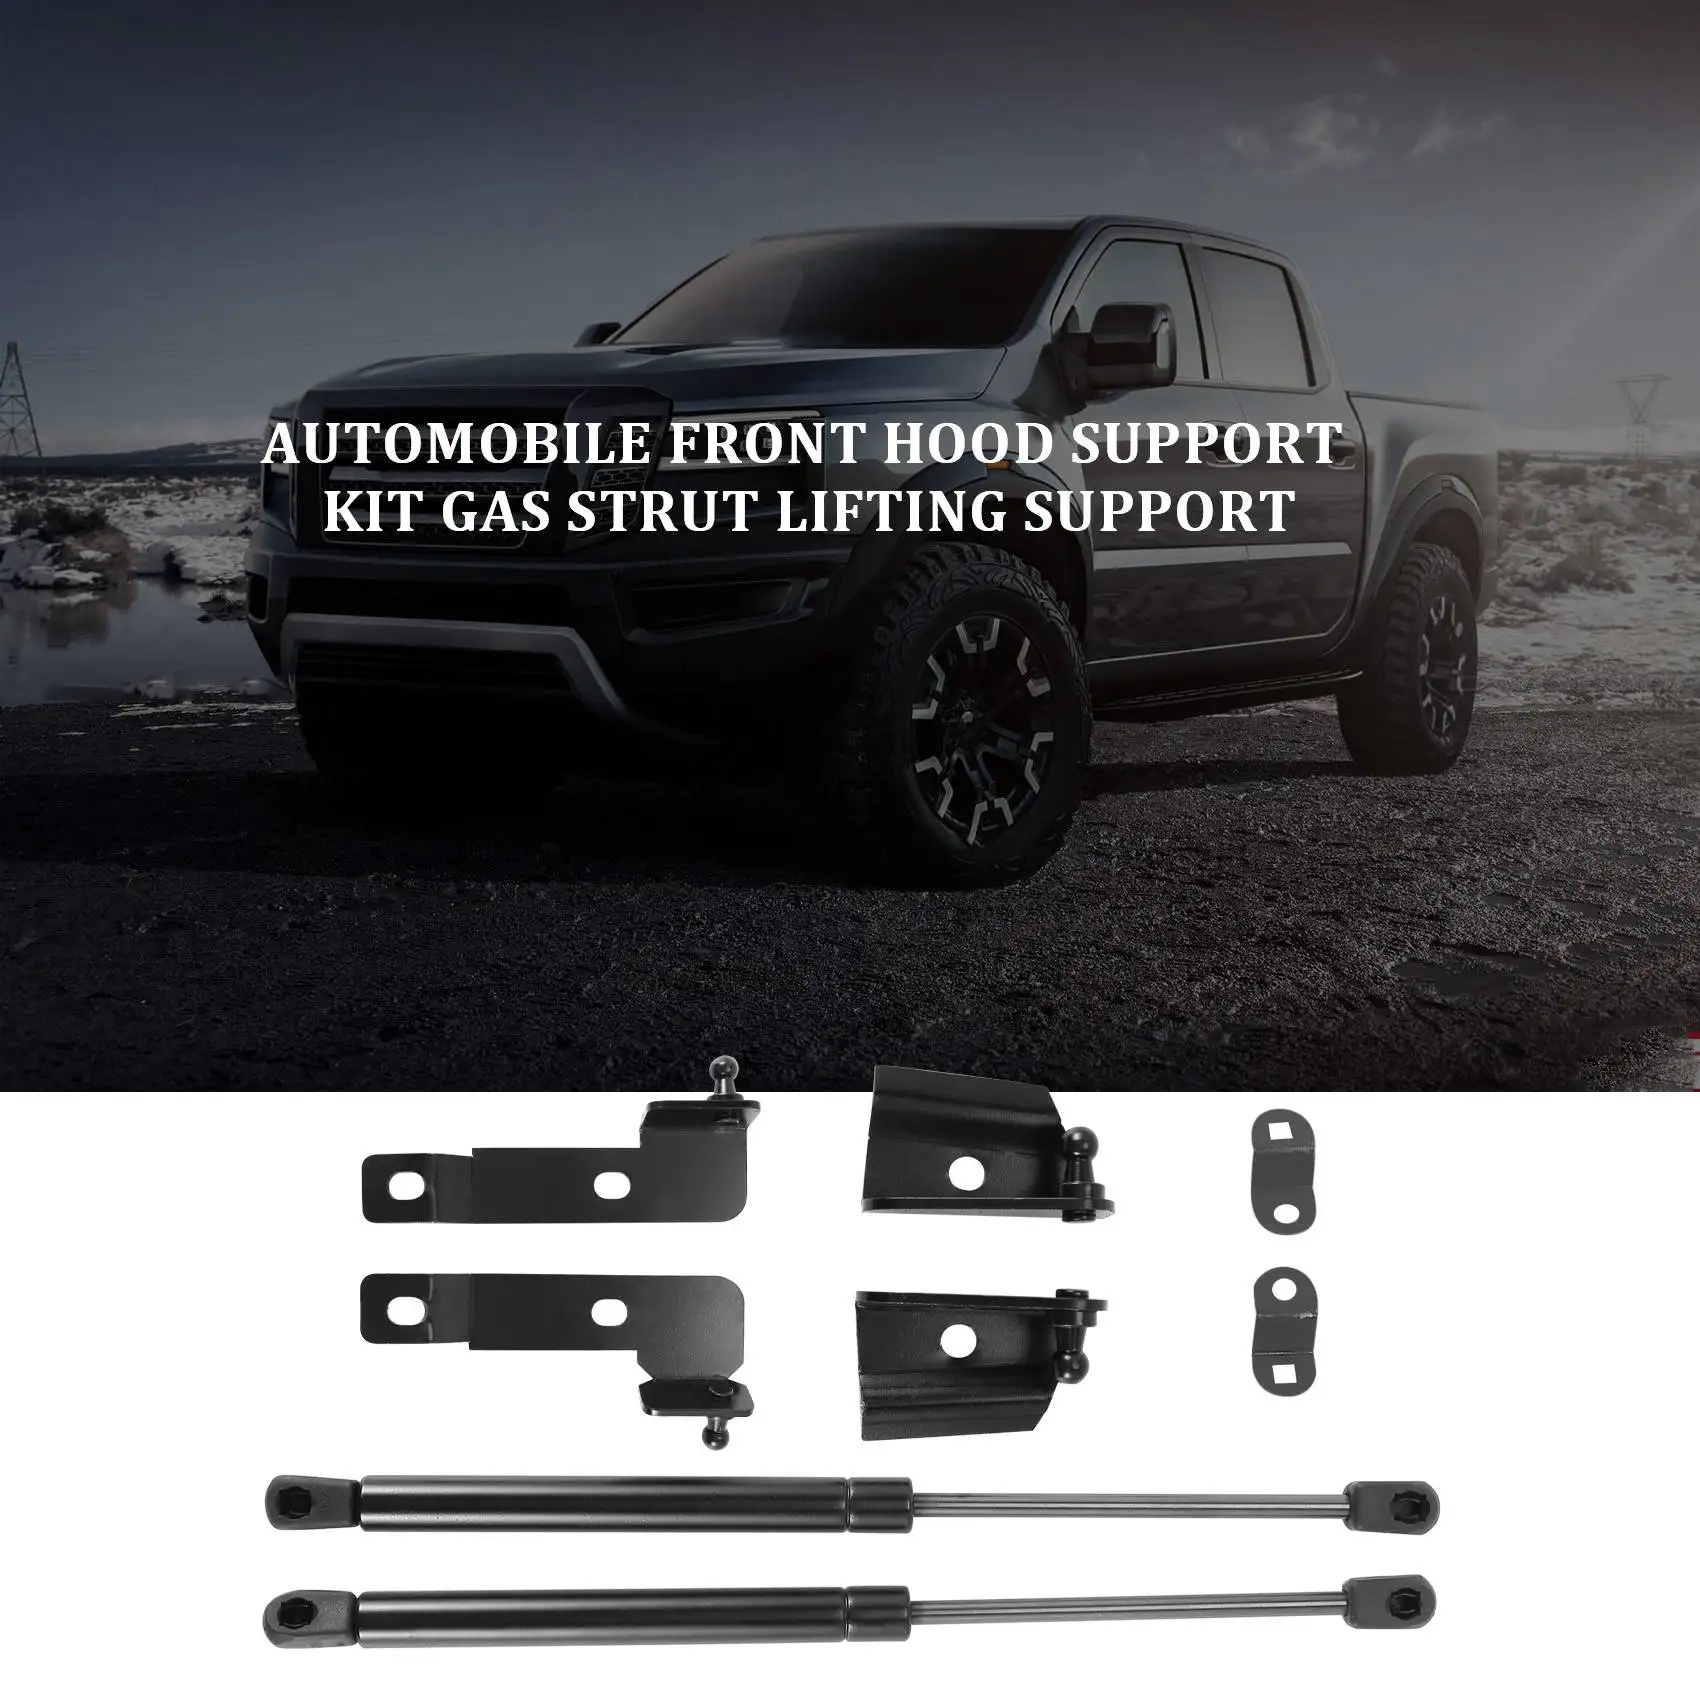 

Car Front Bonnet Hood Cover Support Kit Gas Struts Lift Support for Nissan Frontier Navara D40 2004-2018 for Pathfinder (R51)